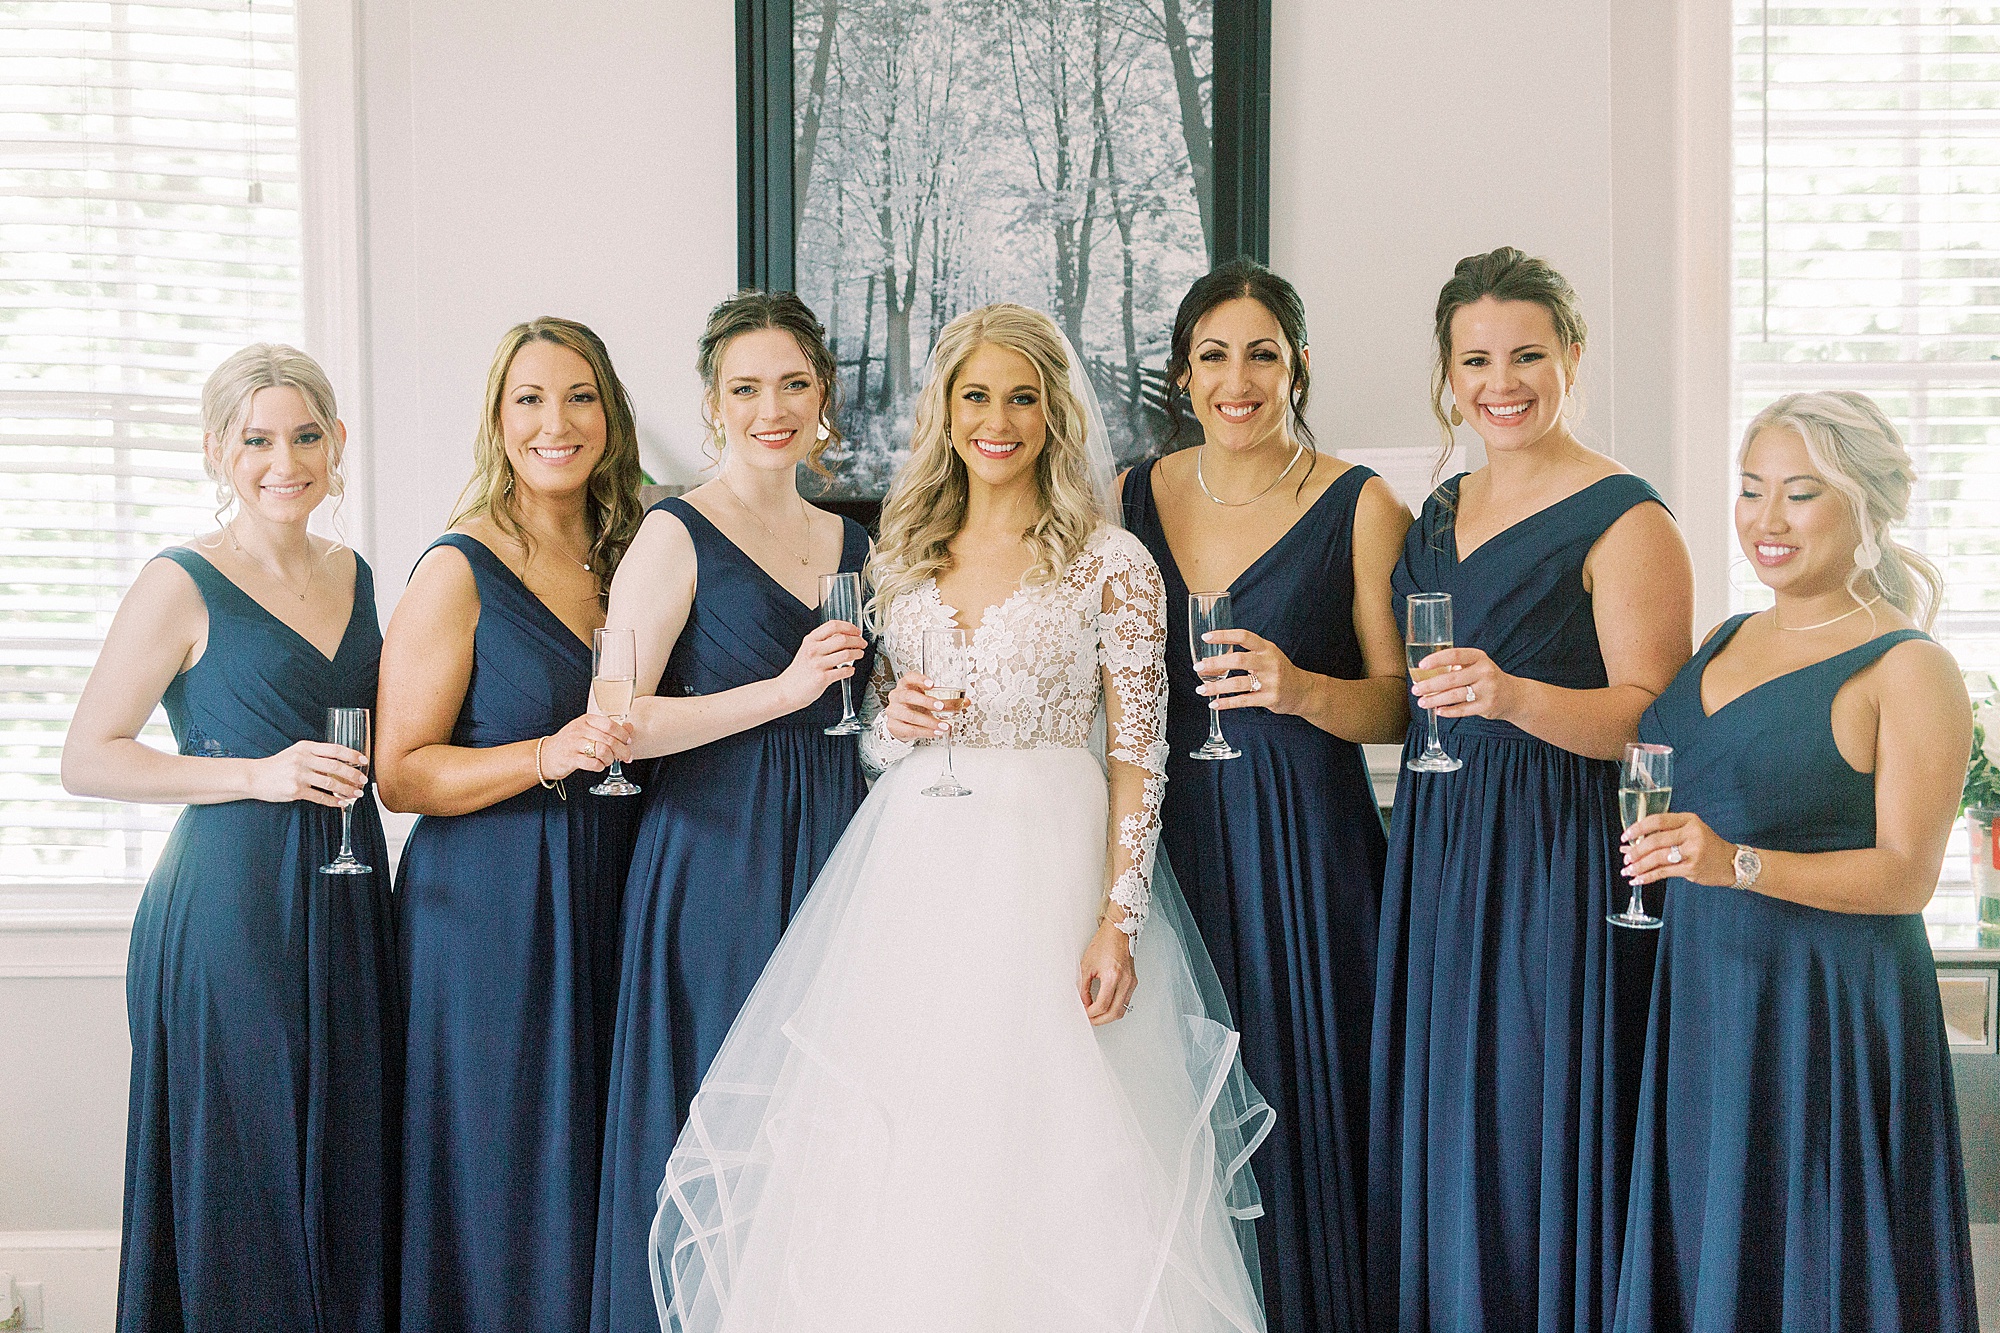 bride in hayden olivia bridal gown poses with bridesmaids in navy gown